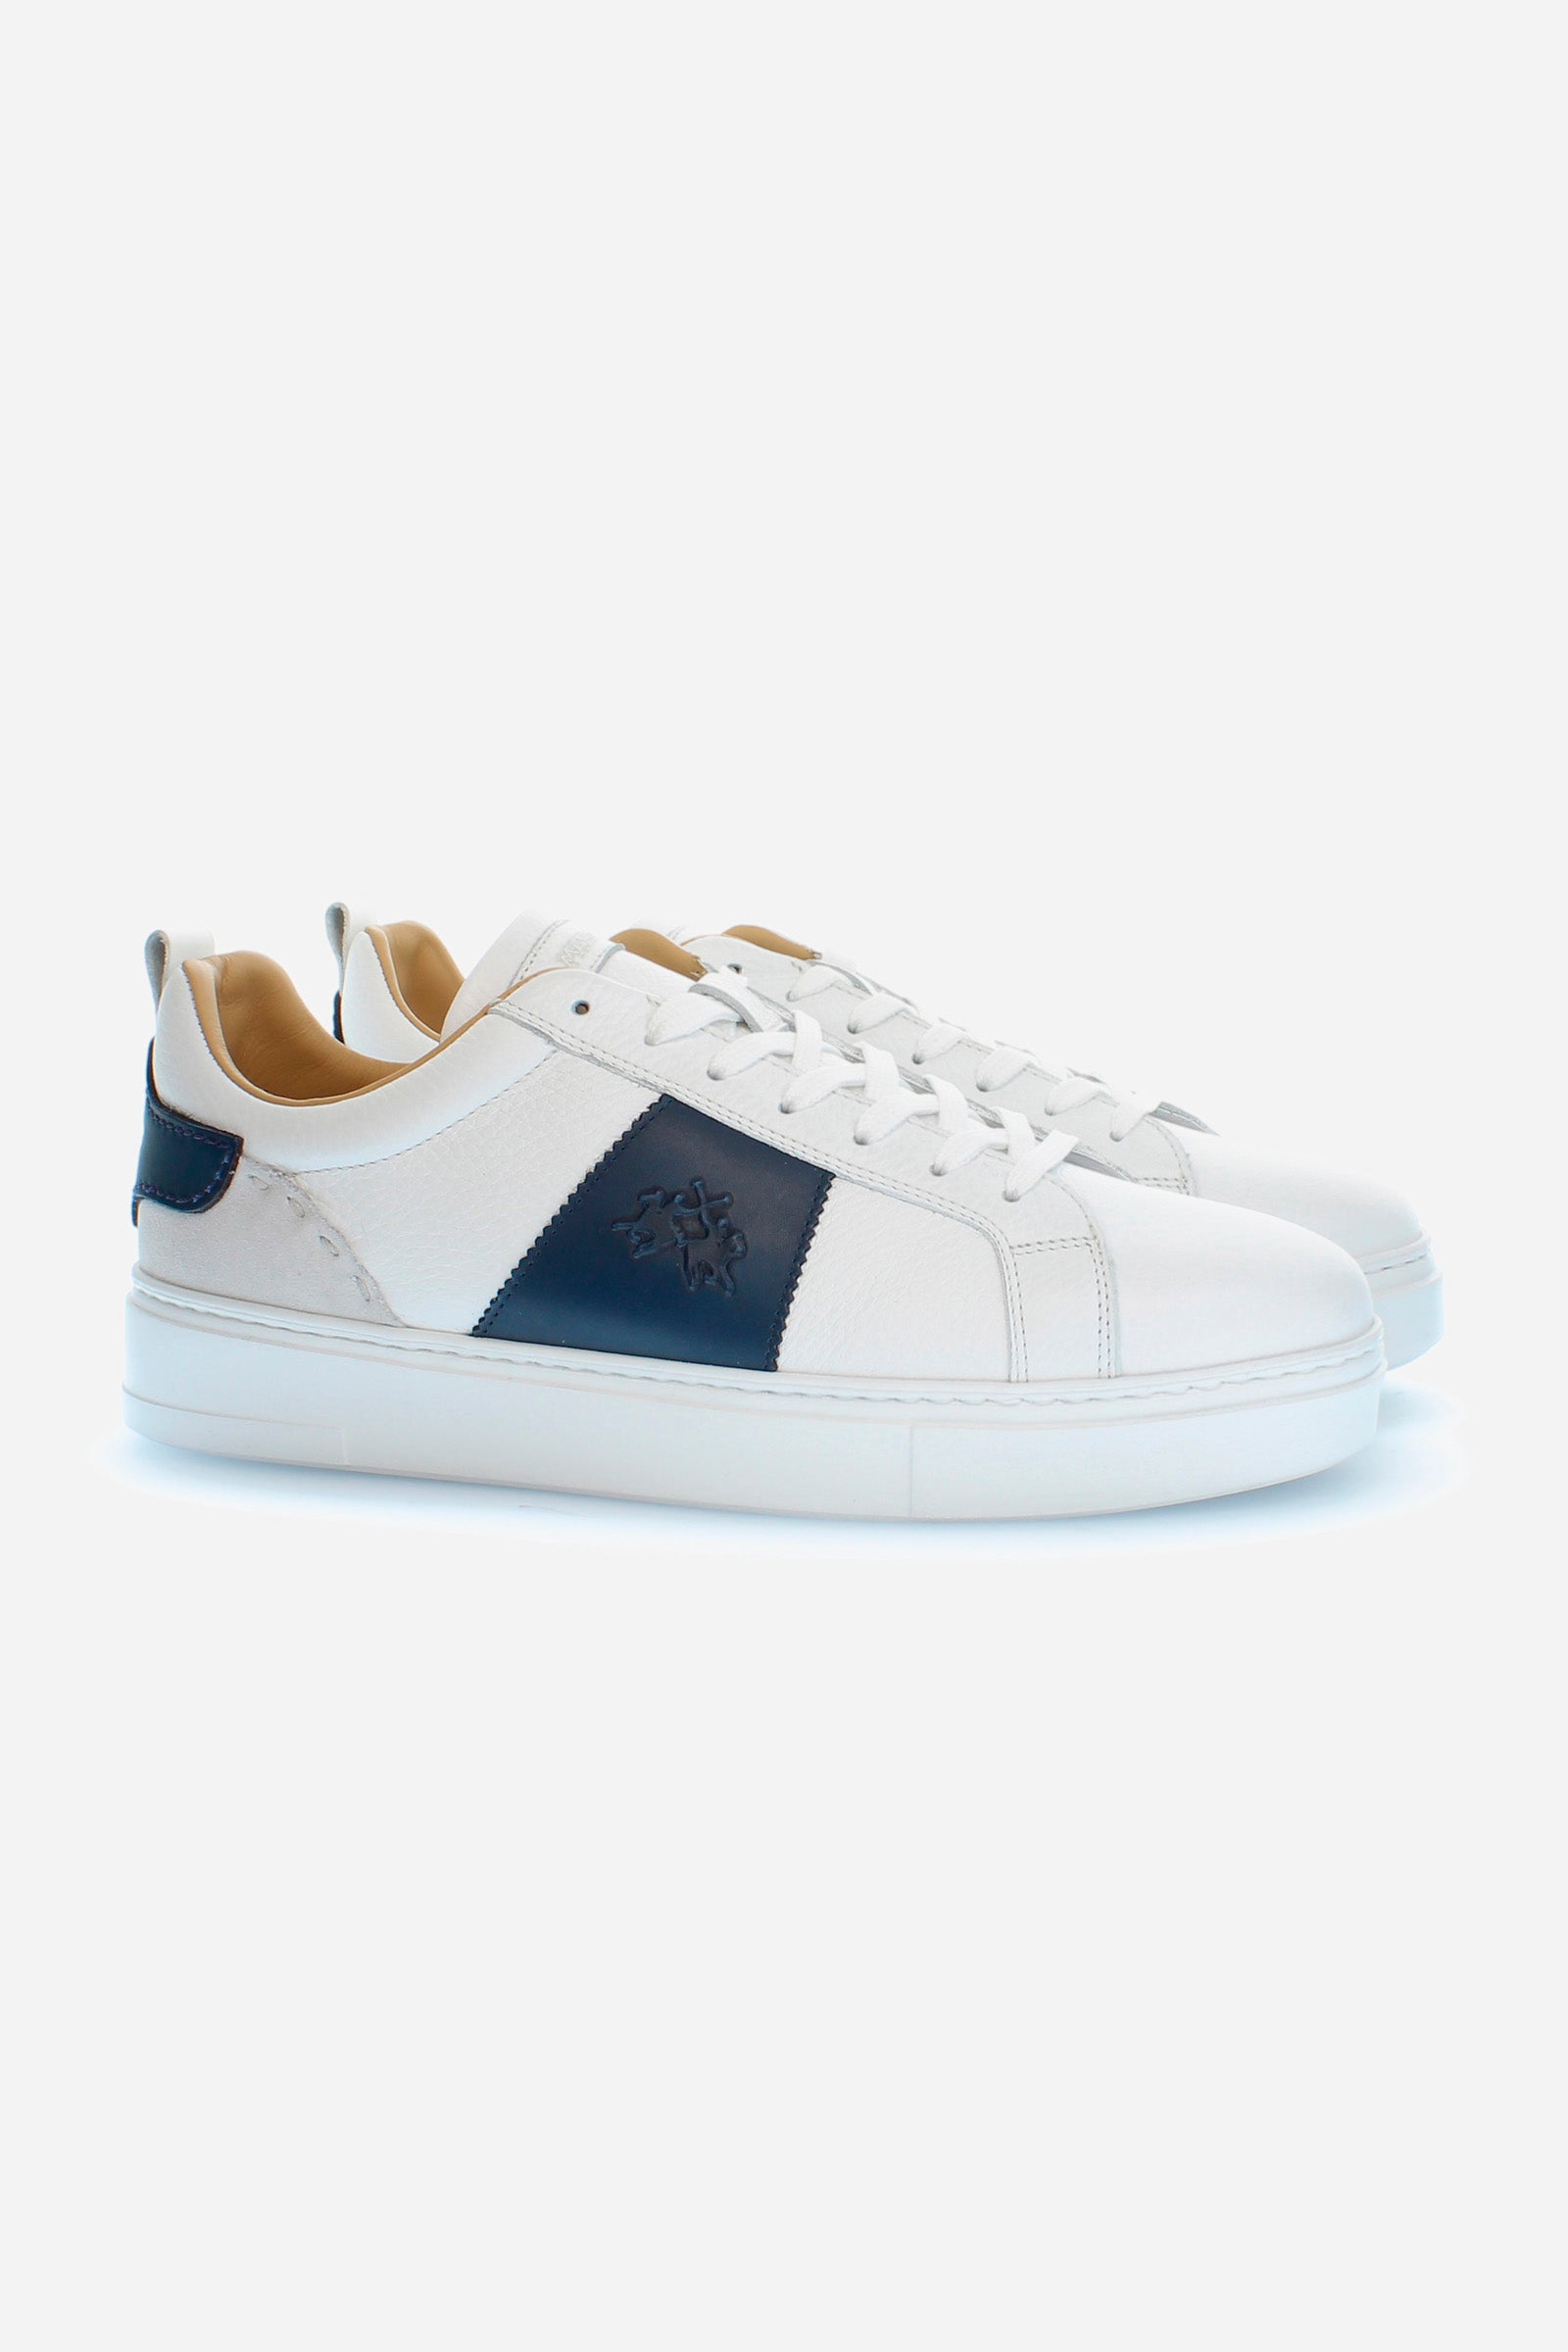 Men's trainers in leather and suede